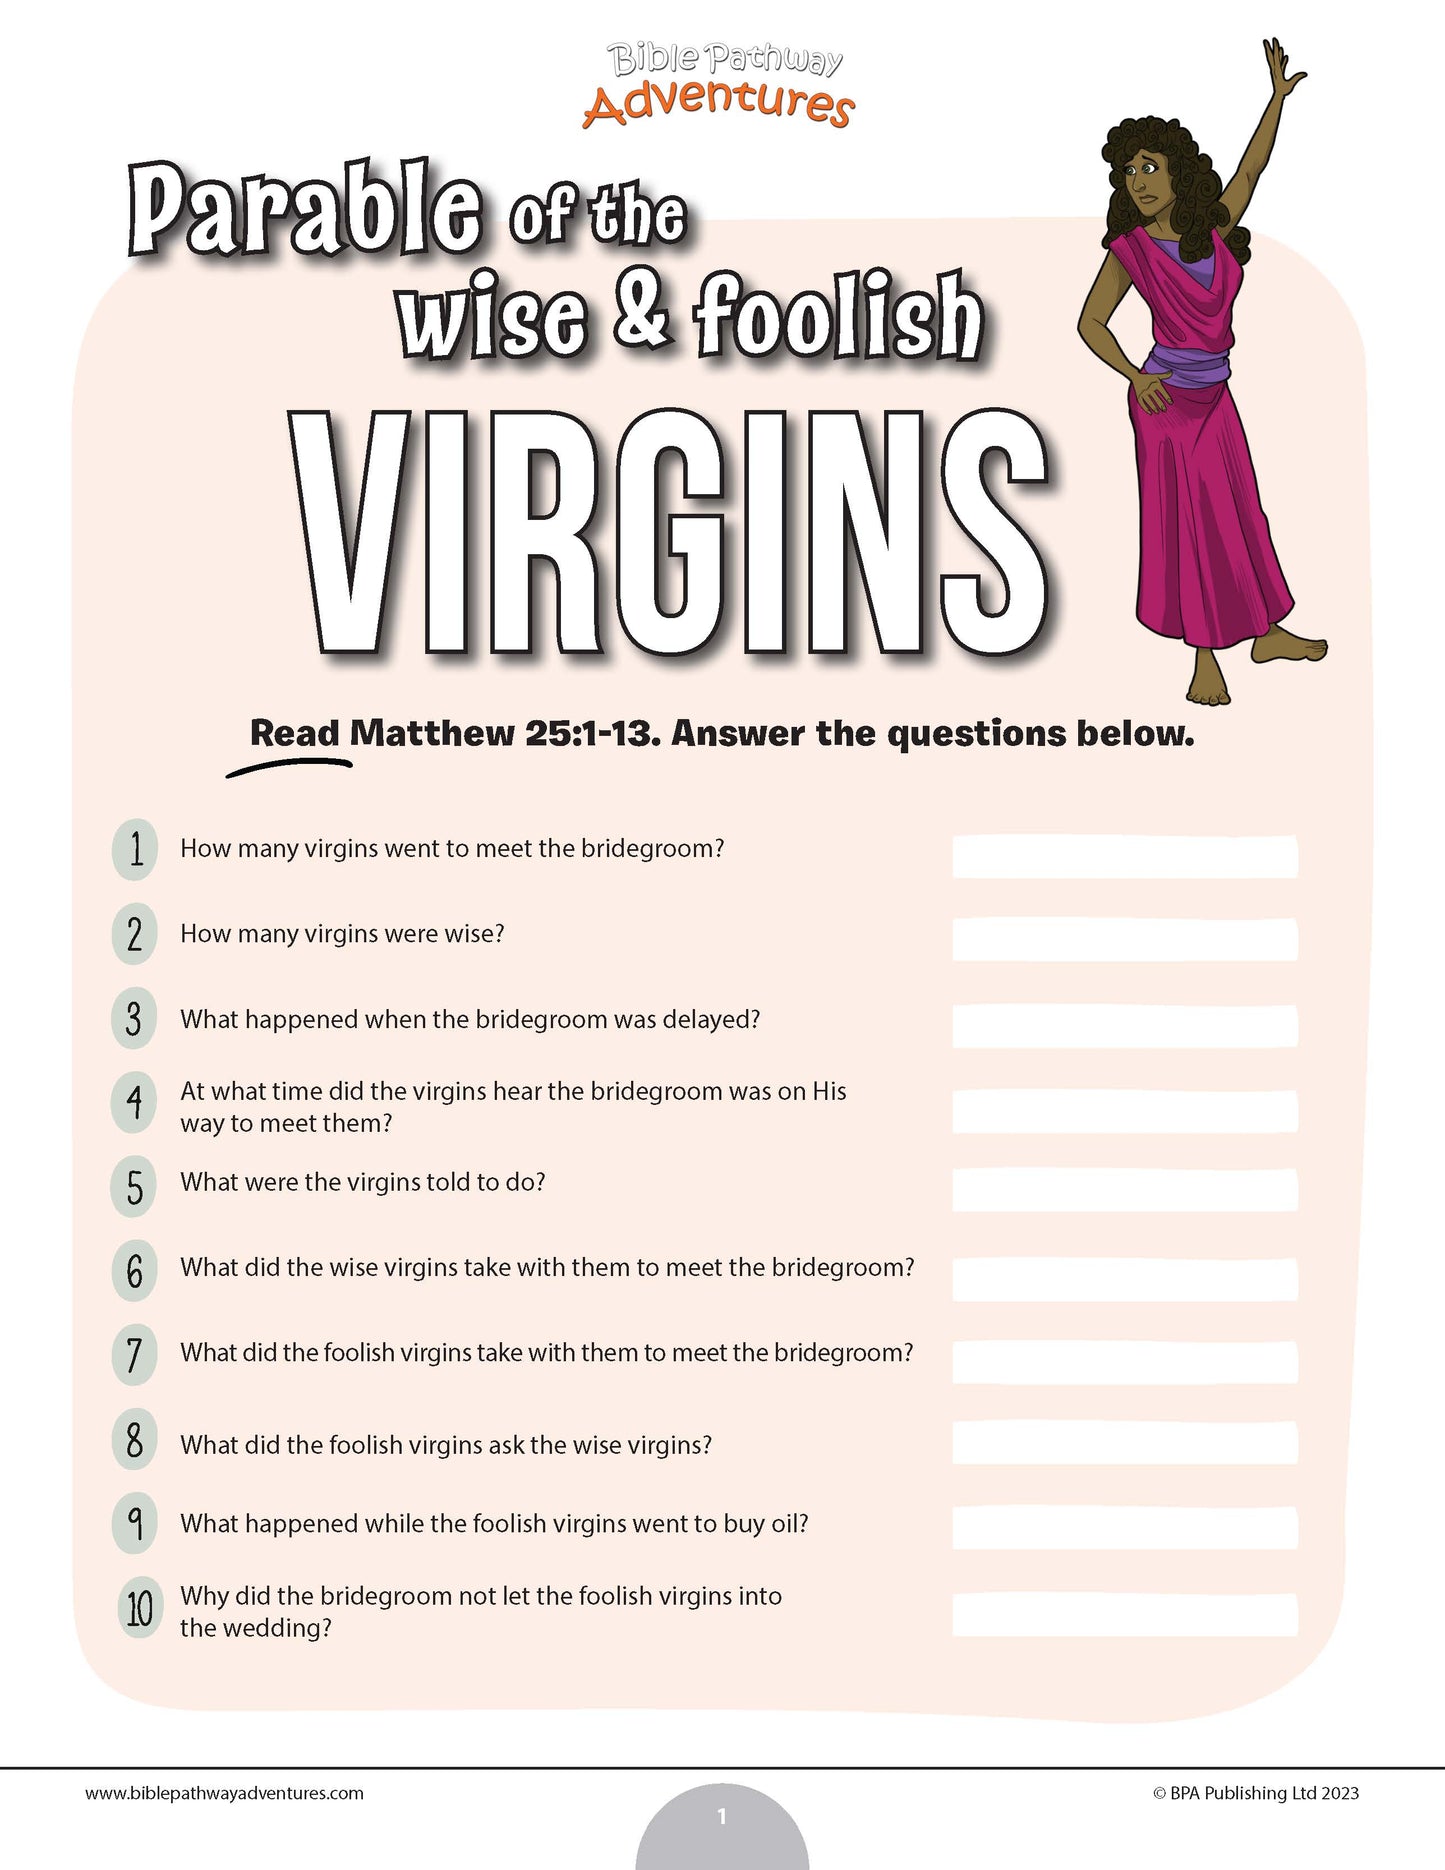 Parable of the wise and foolish virgins quiz (PDF)